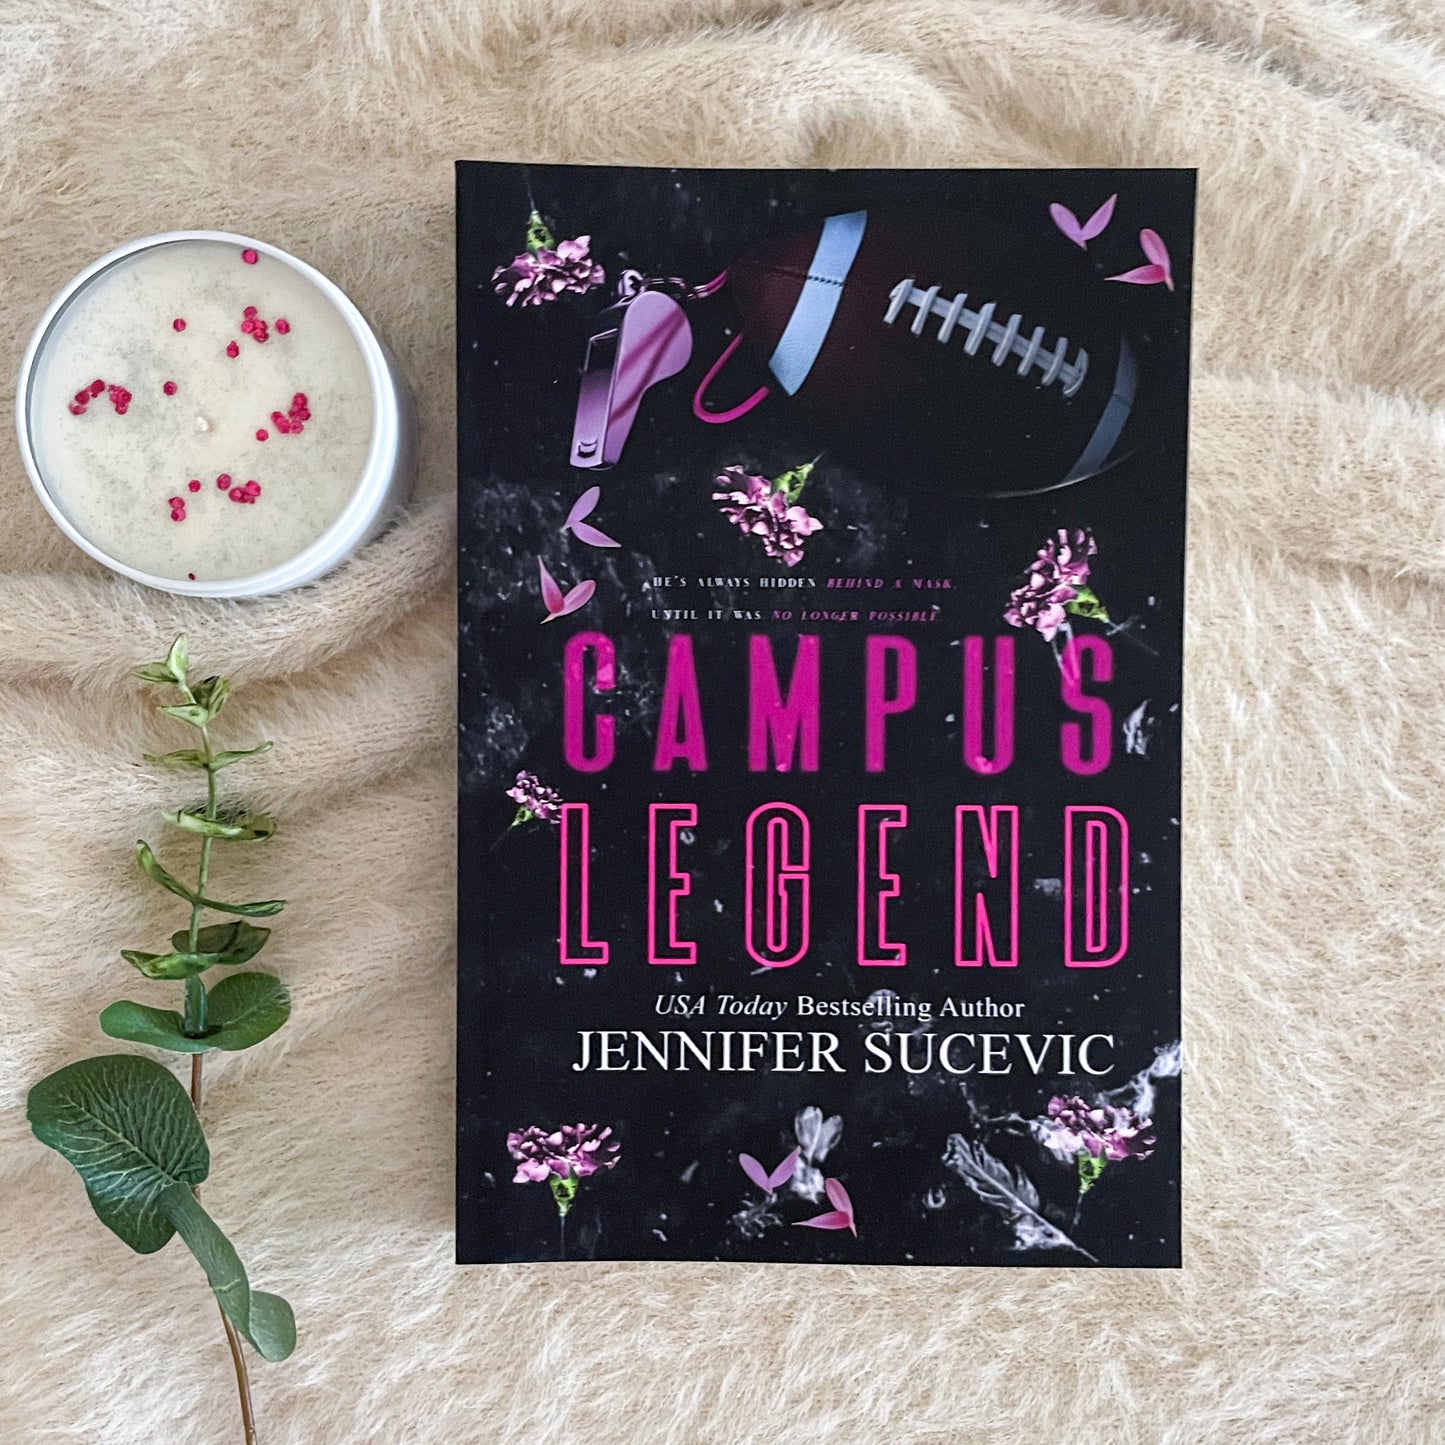 The Campus series by Jennifer Sucevic